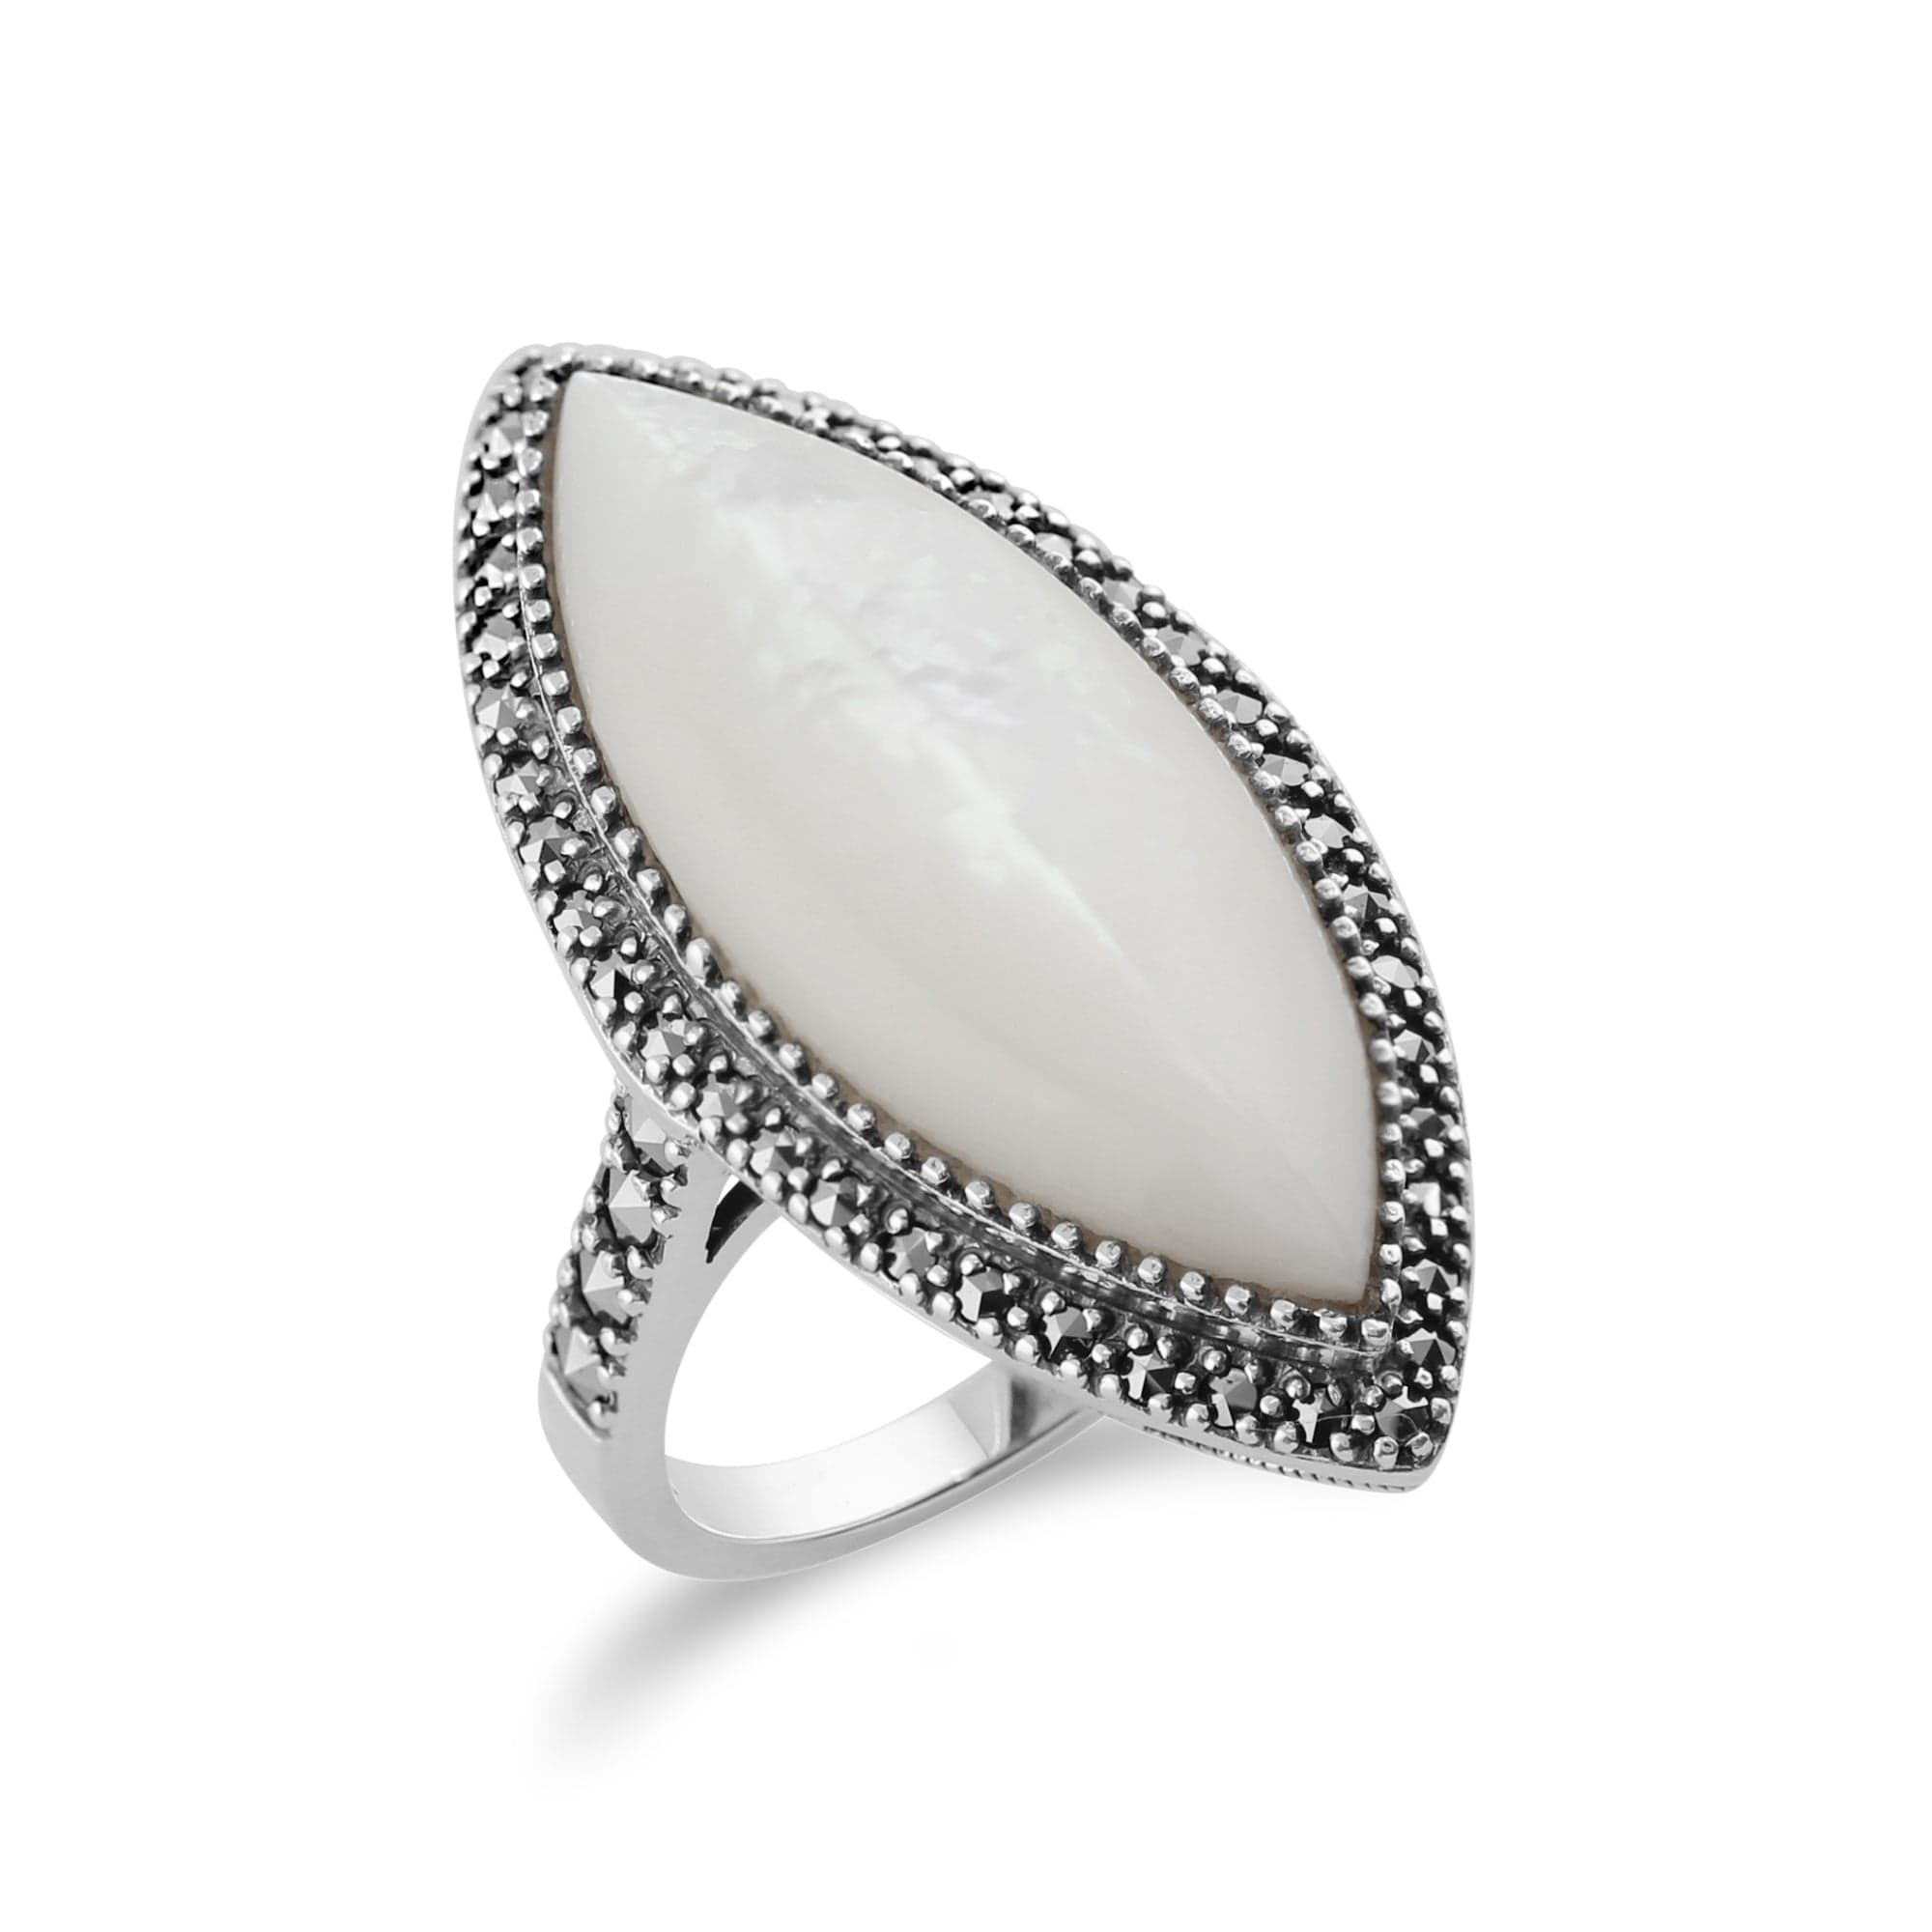 Art Deco Style Marquise Mother of Pearl & Marcasite Statement Ring in 925 Sterling Silver